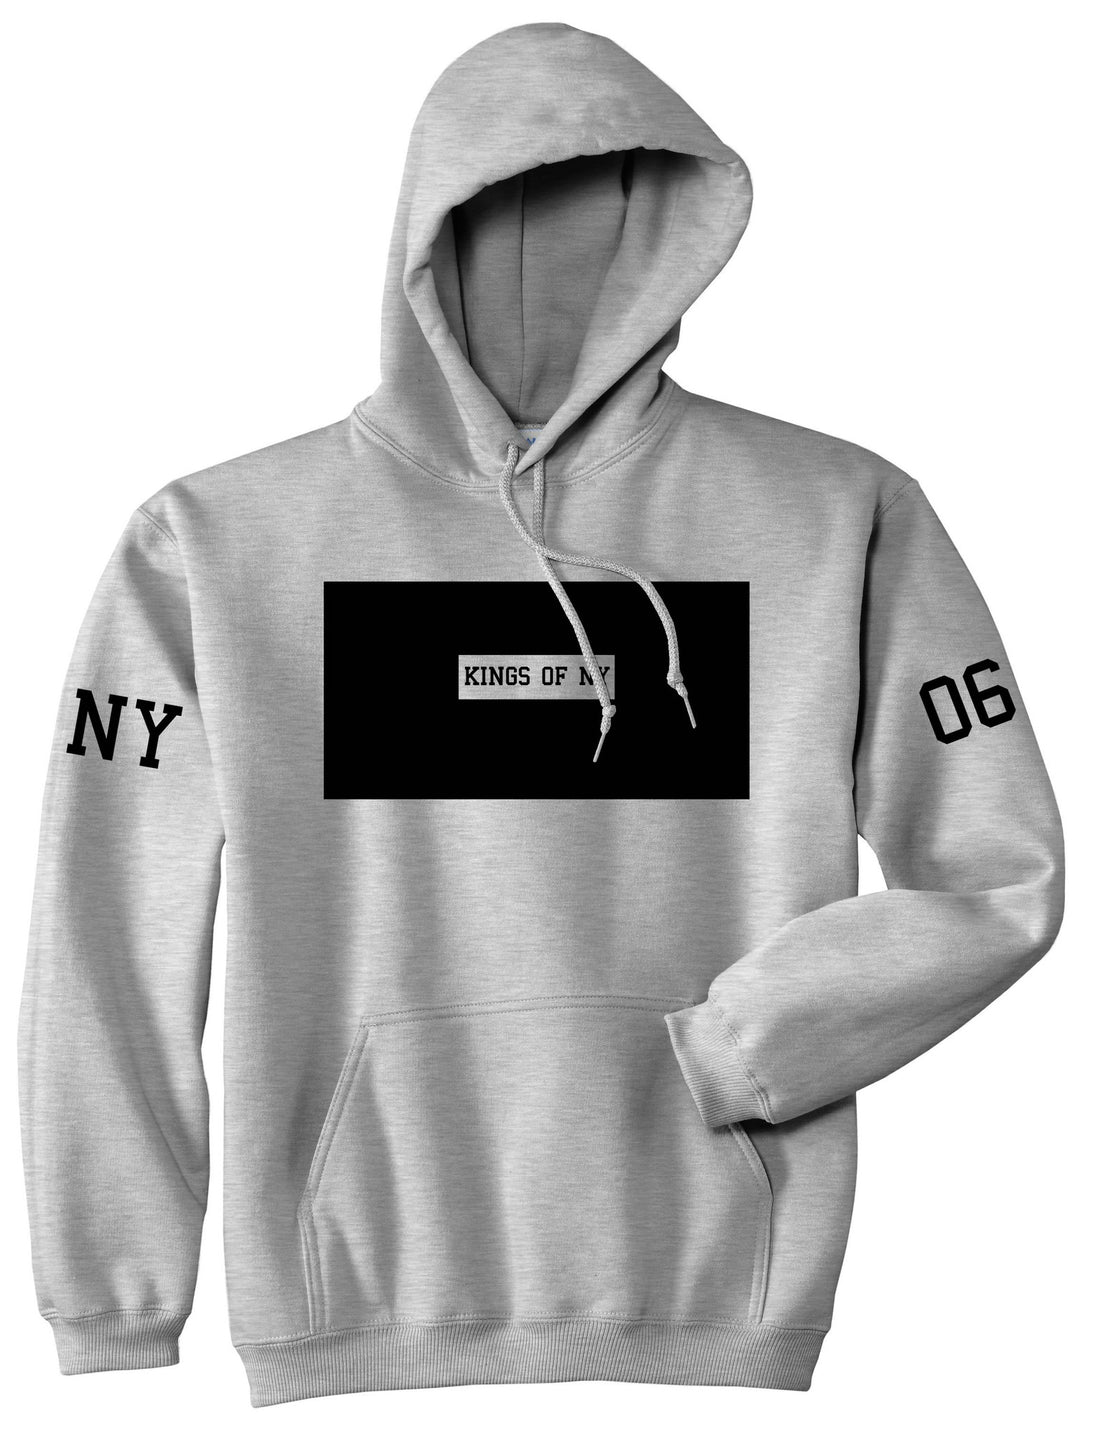 New York Logo 2006 Style Trill Pullover Hoodie Hoody In Grey by Kings Of NY